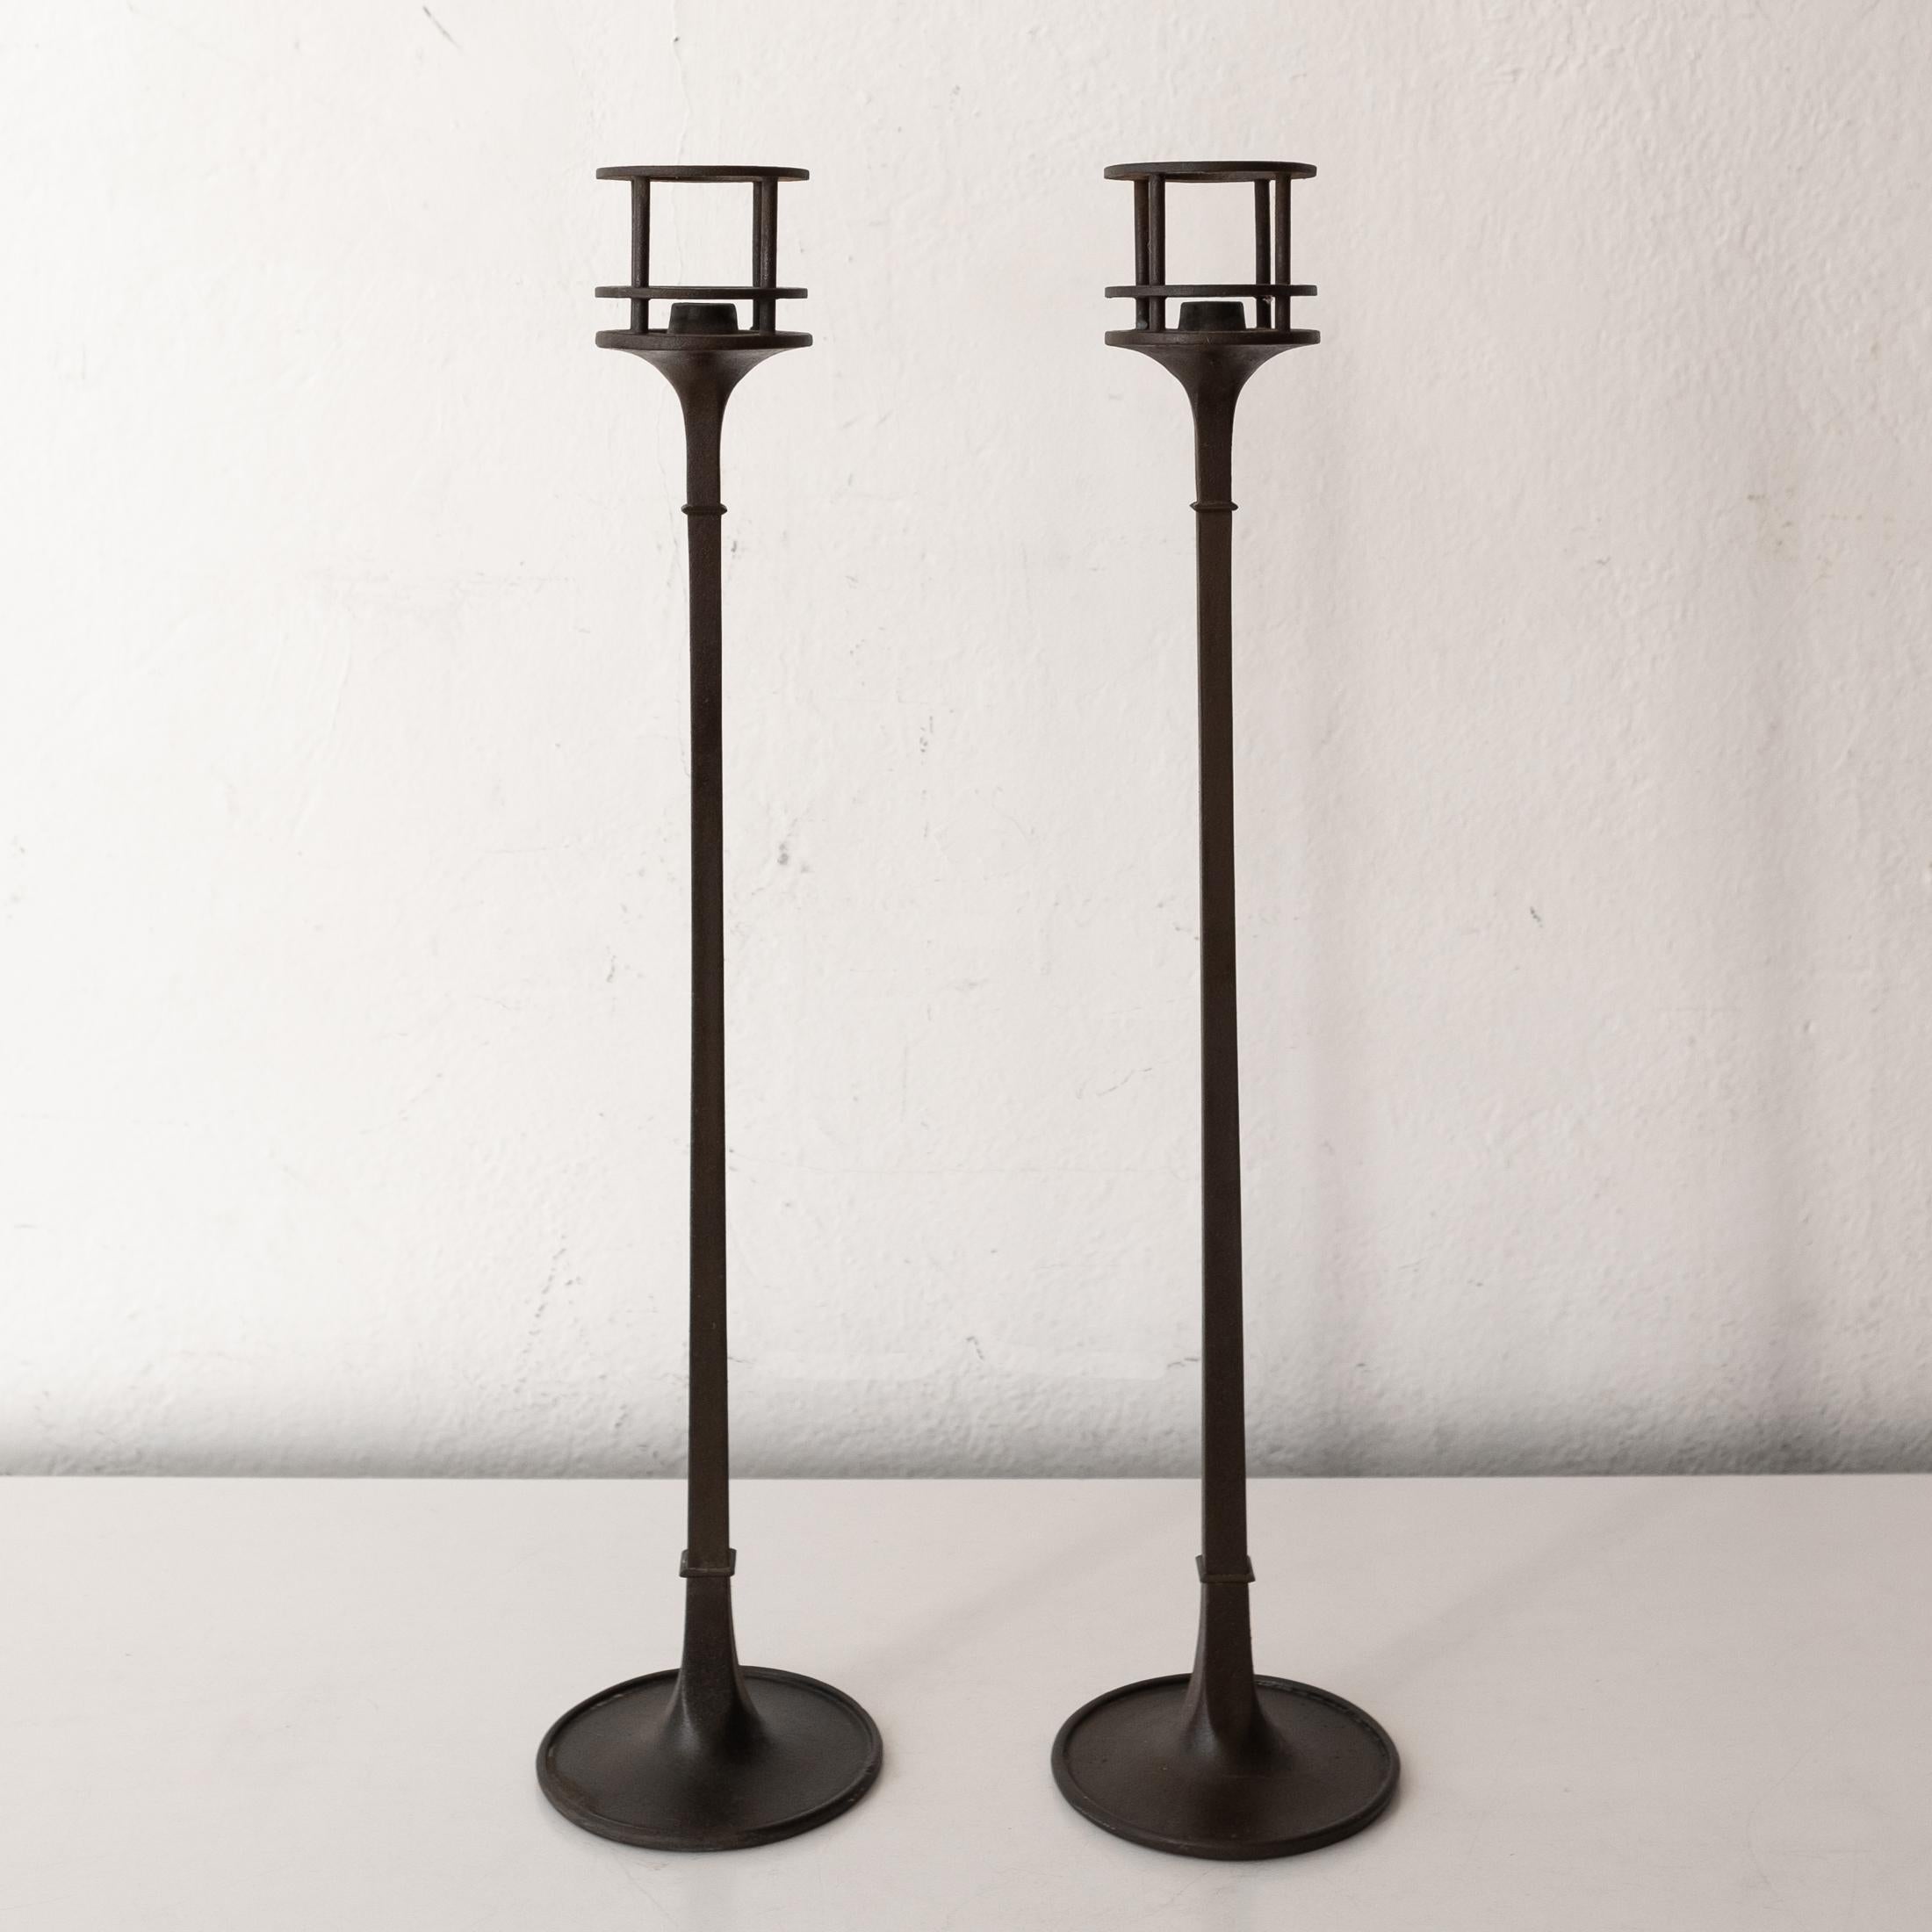 Rare pair of tall candleholders designed by Jens Quistgaard for Dansk. Solid cast iron with brass fittings. Marked on the bottom. Modernist sculptural design from the midcentury. Made in Denmark.